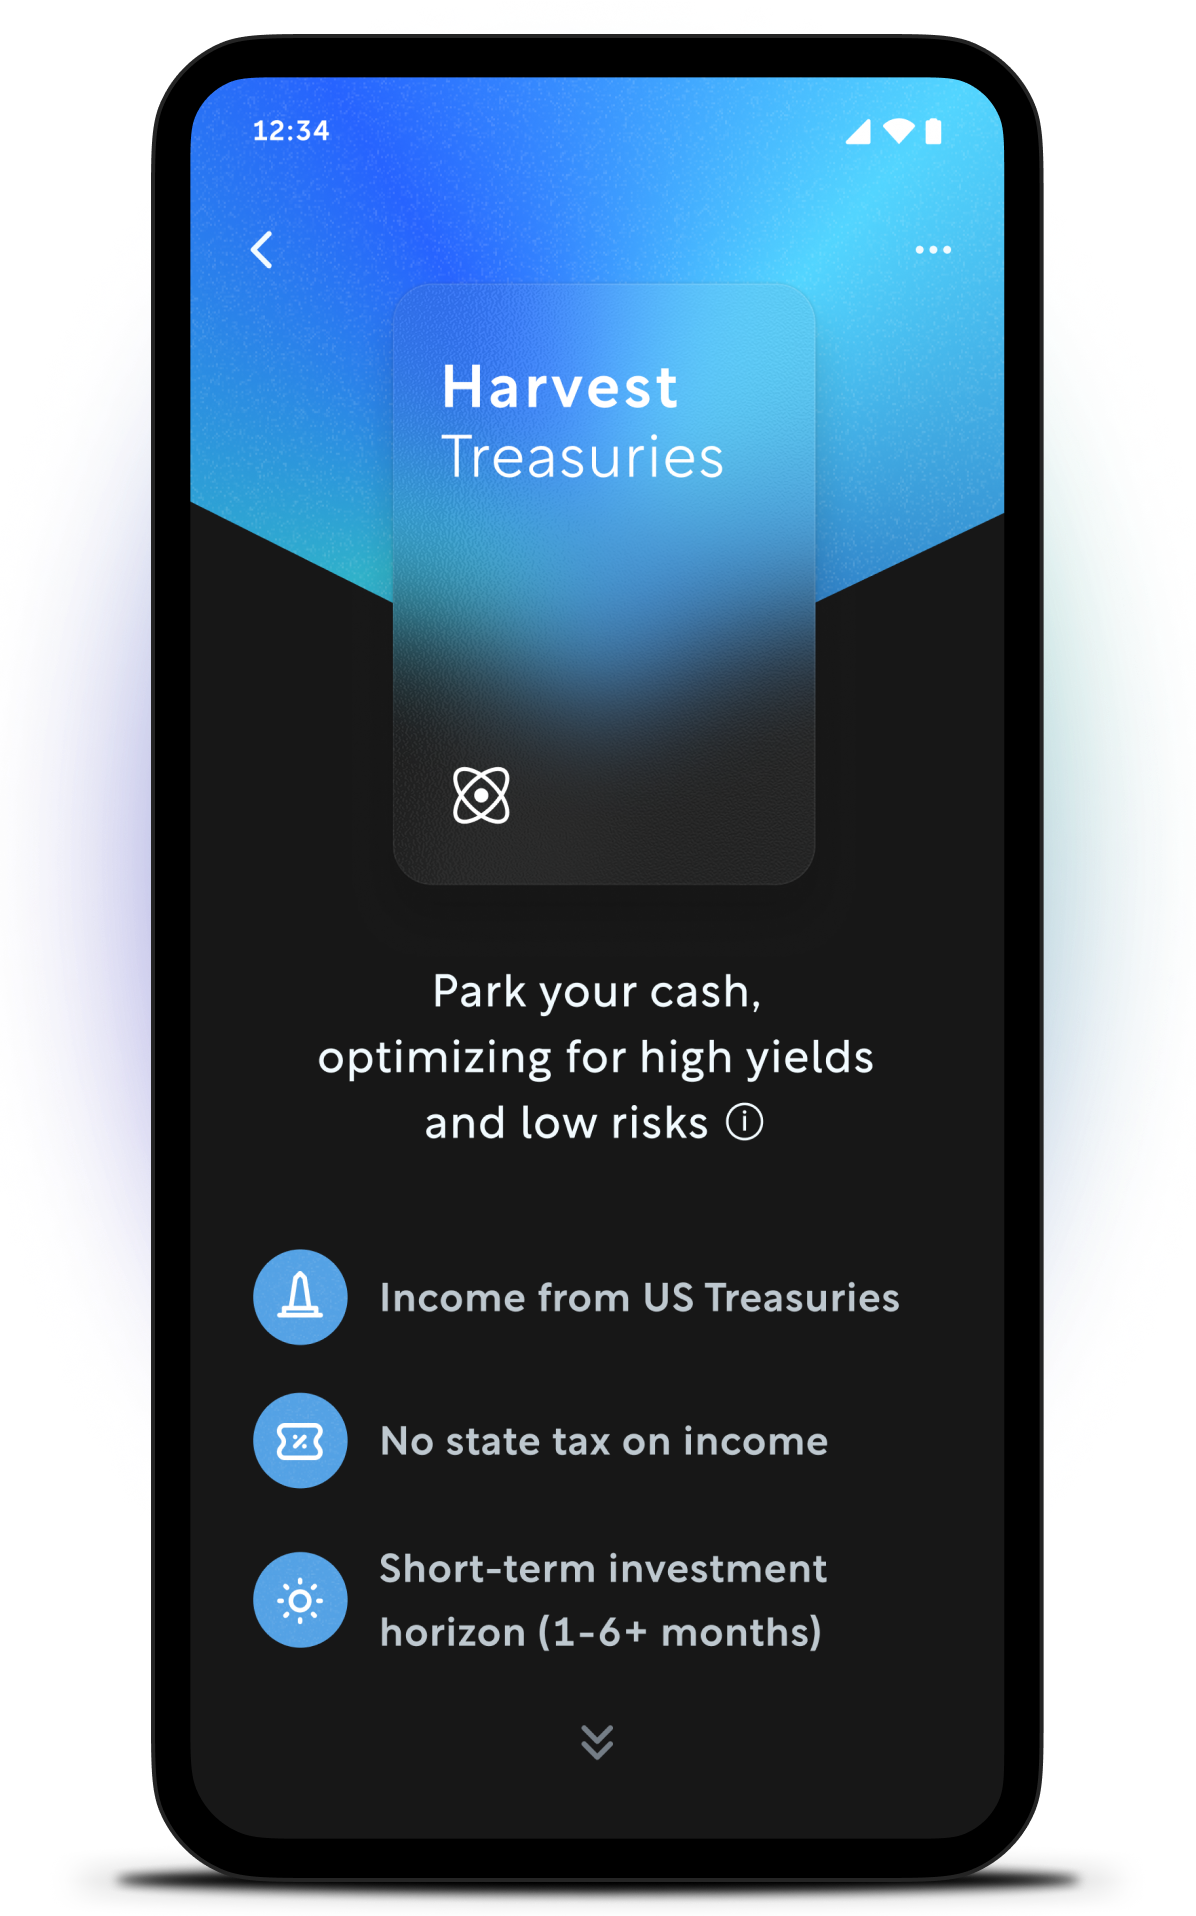 Preview of Harvest Treasuries screen on a mobile device